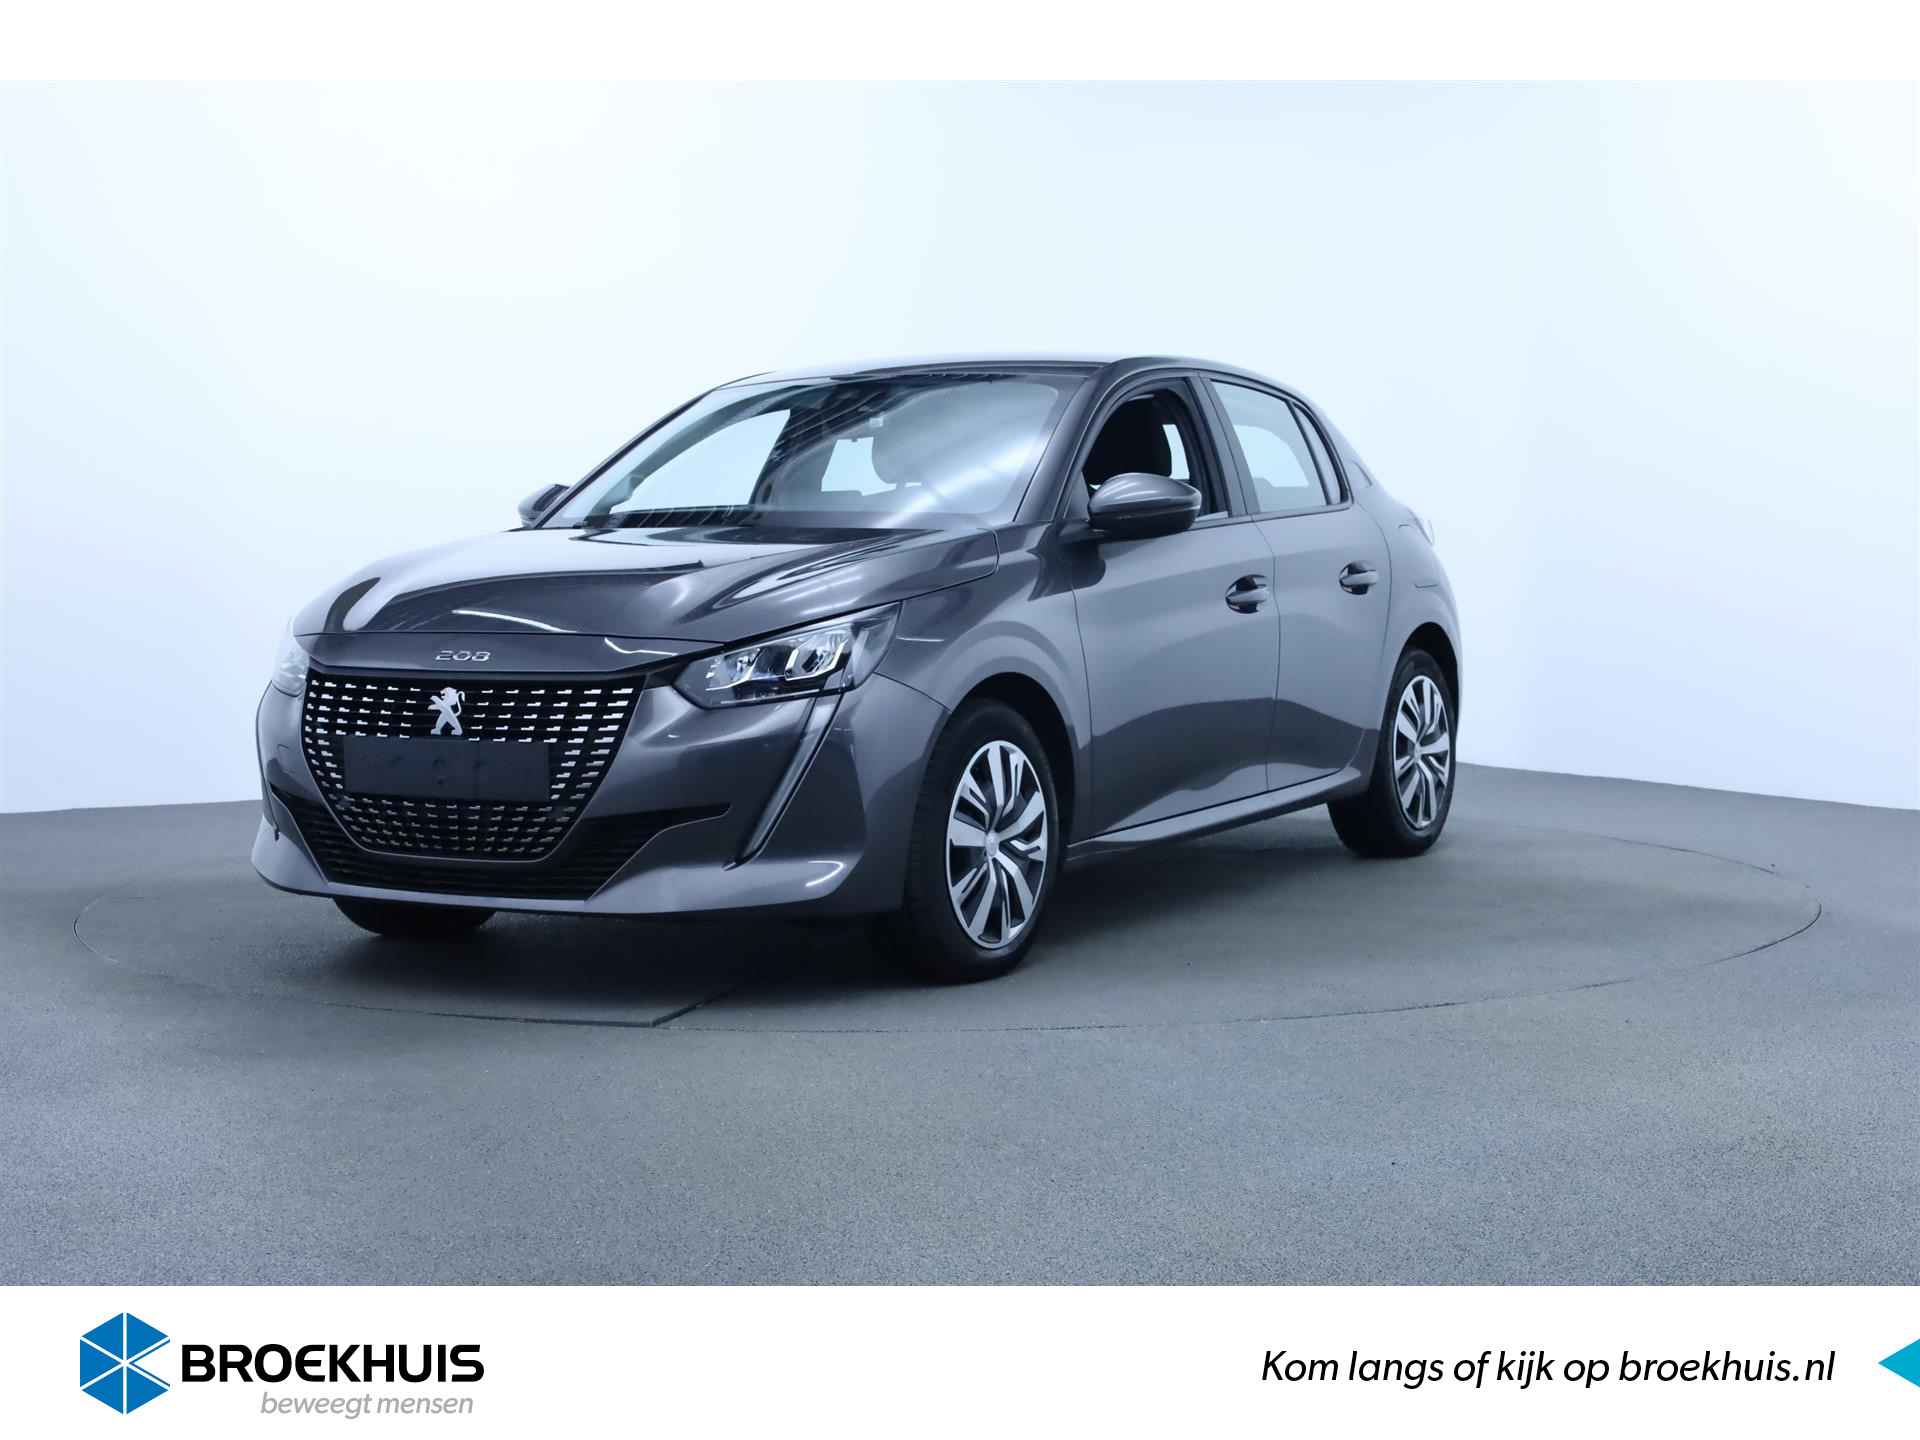 Peugeot 208 1.2 100PK Active | Stoelverwaming | LED | Apple/Android Carplay | DAB | Bluetooth | Centrale Vergrendeling | USB | Touchscreen - 1/18